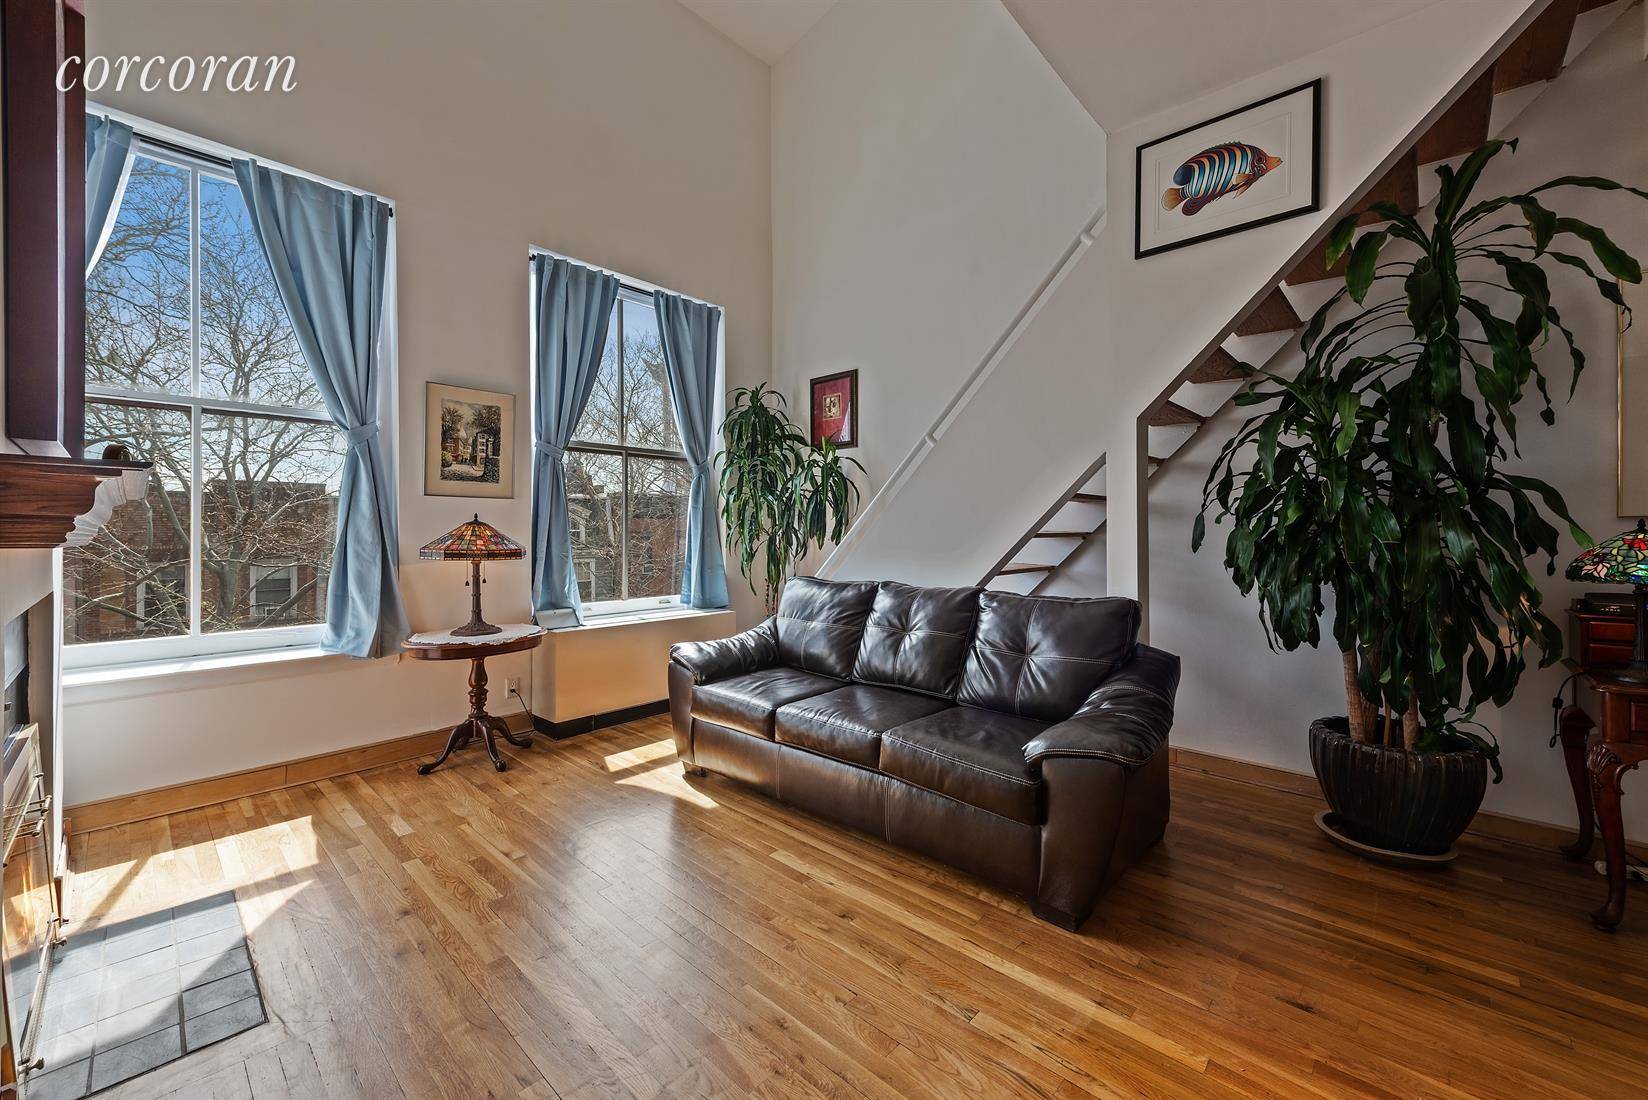 Come see this dramatic one bedroom duplex loft at 121 Pacific Street.